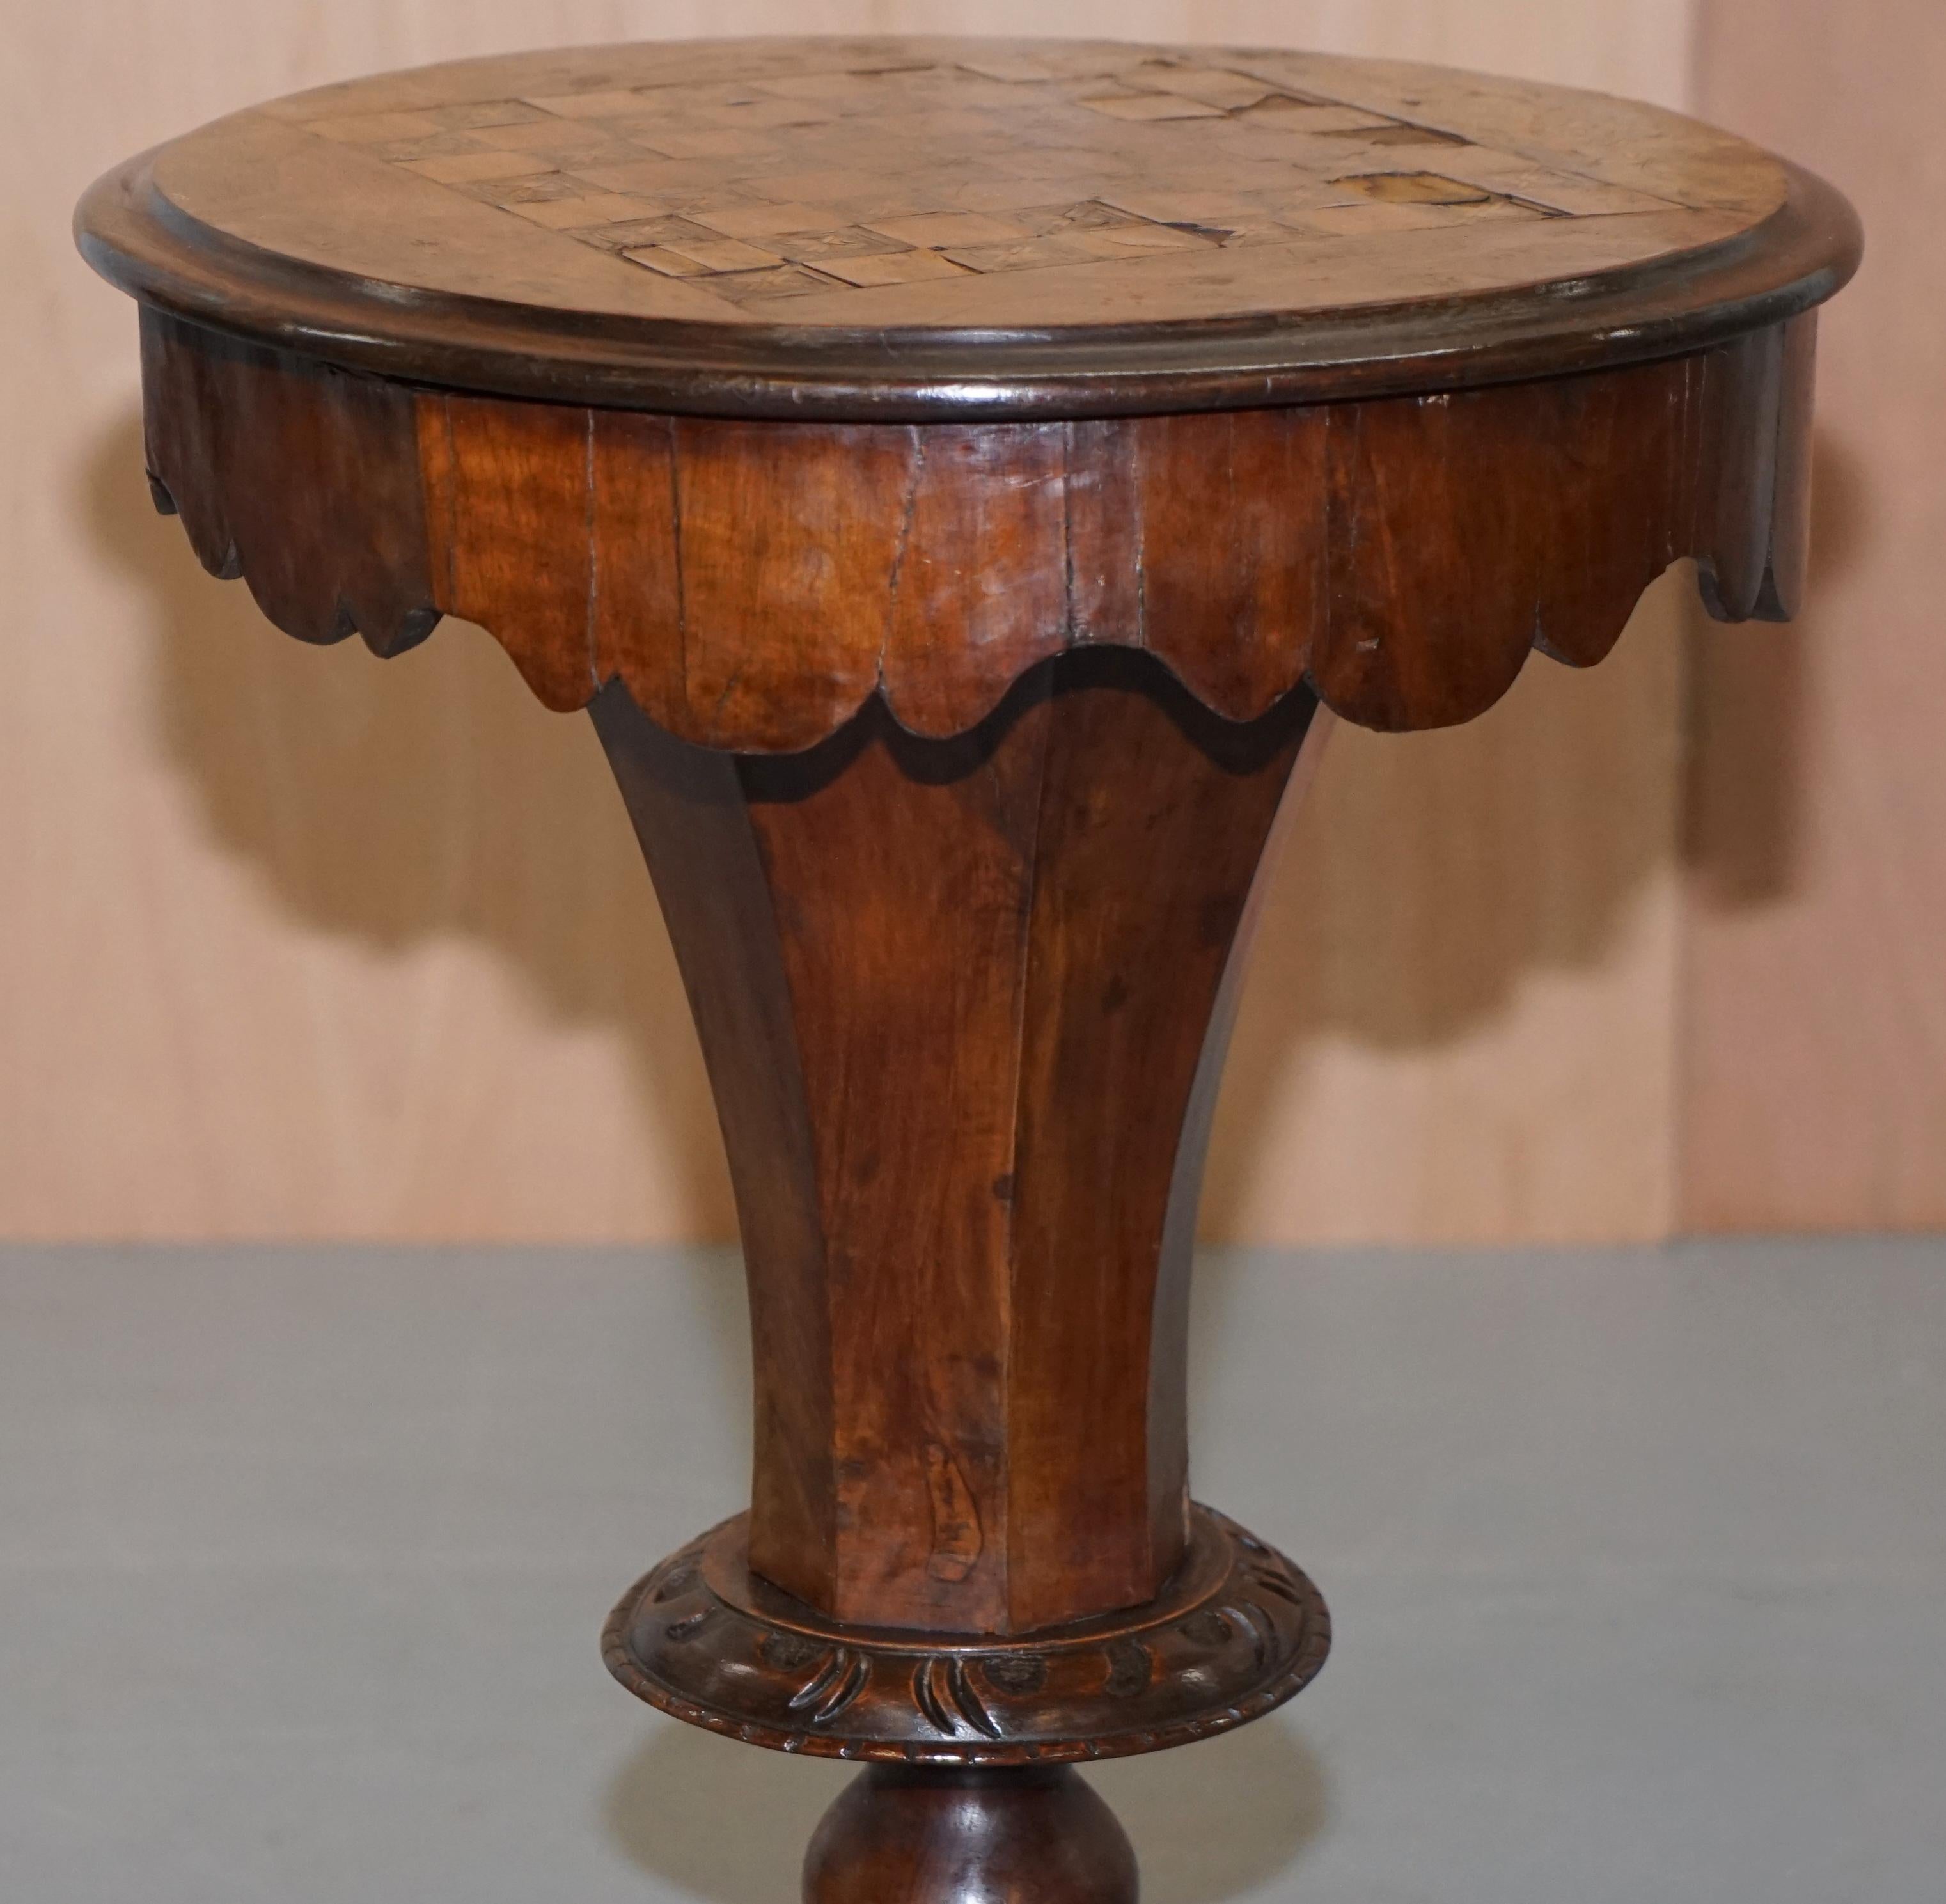 19th Century Burr Walnut & Redwood Victorian Chess Table, Sewing or Work Box Ornate Inlay